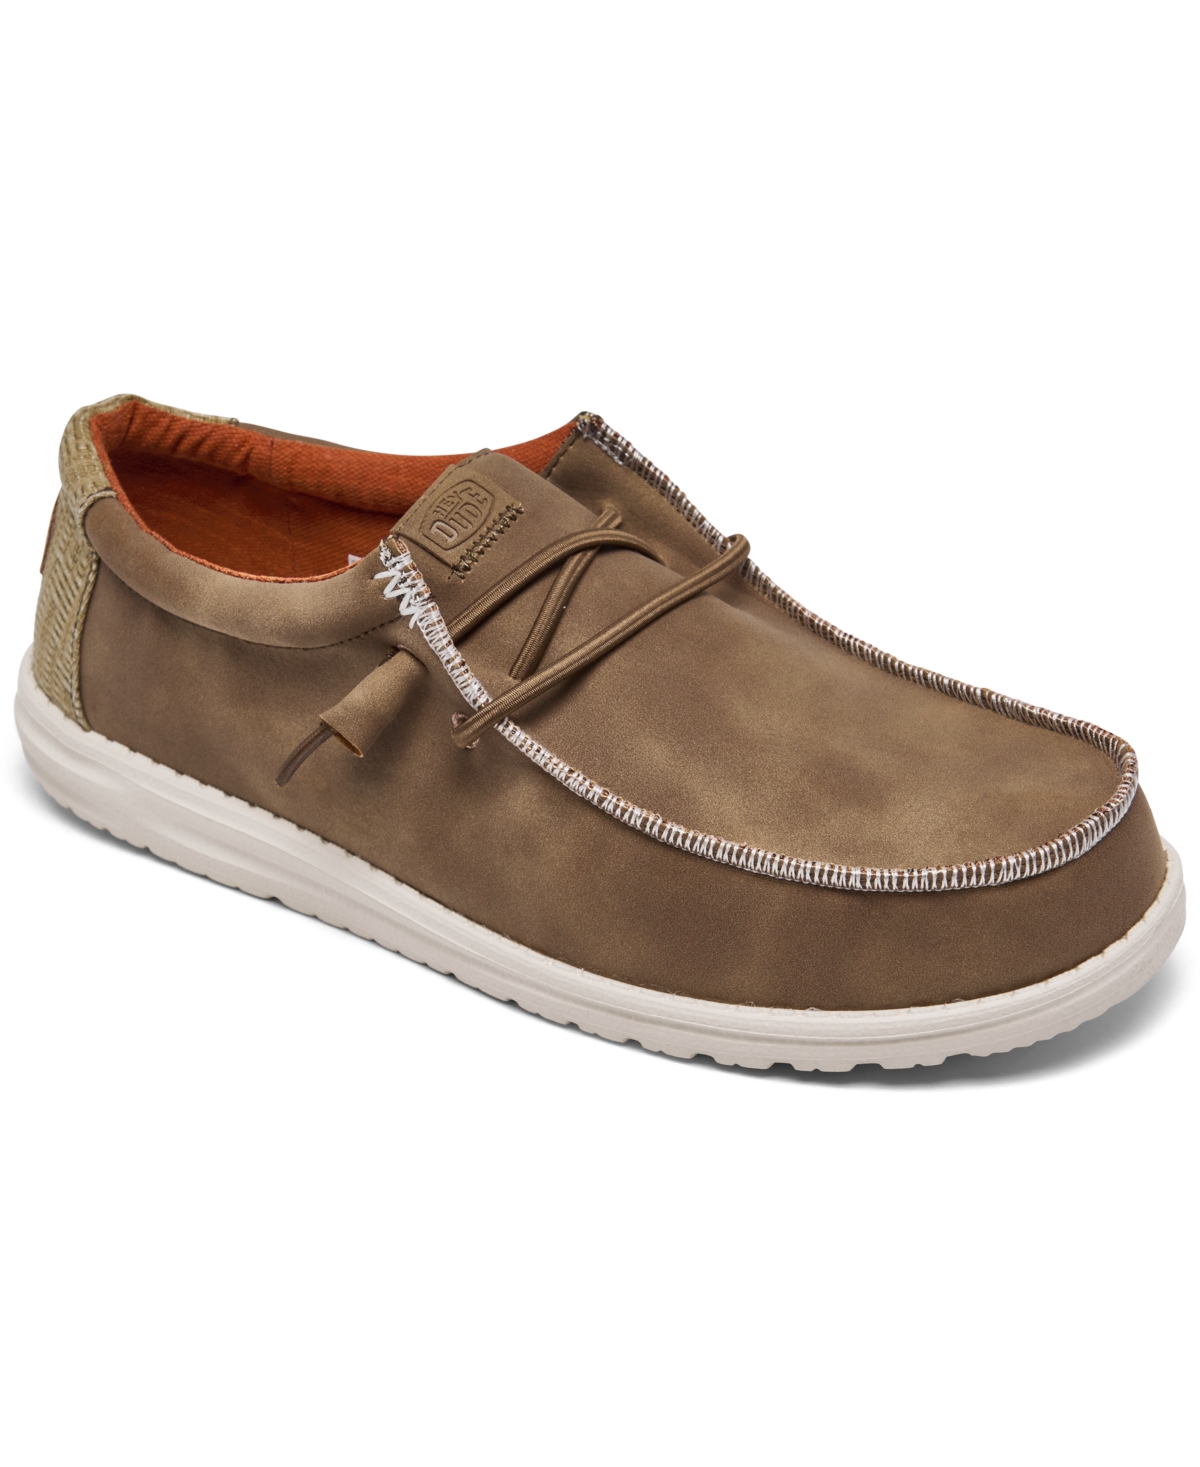 Men's Wally Fabricated Leather Casual Moccasin Sneakers from Finish Line - Tan